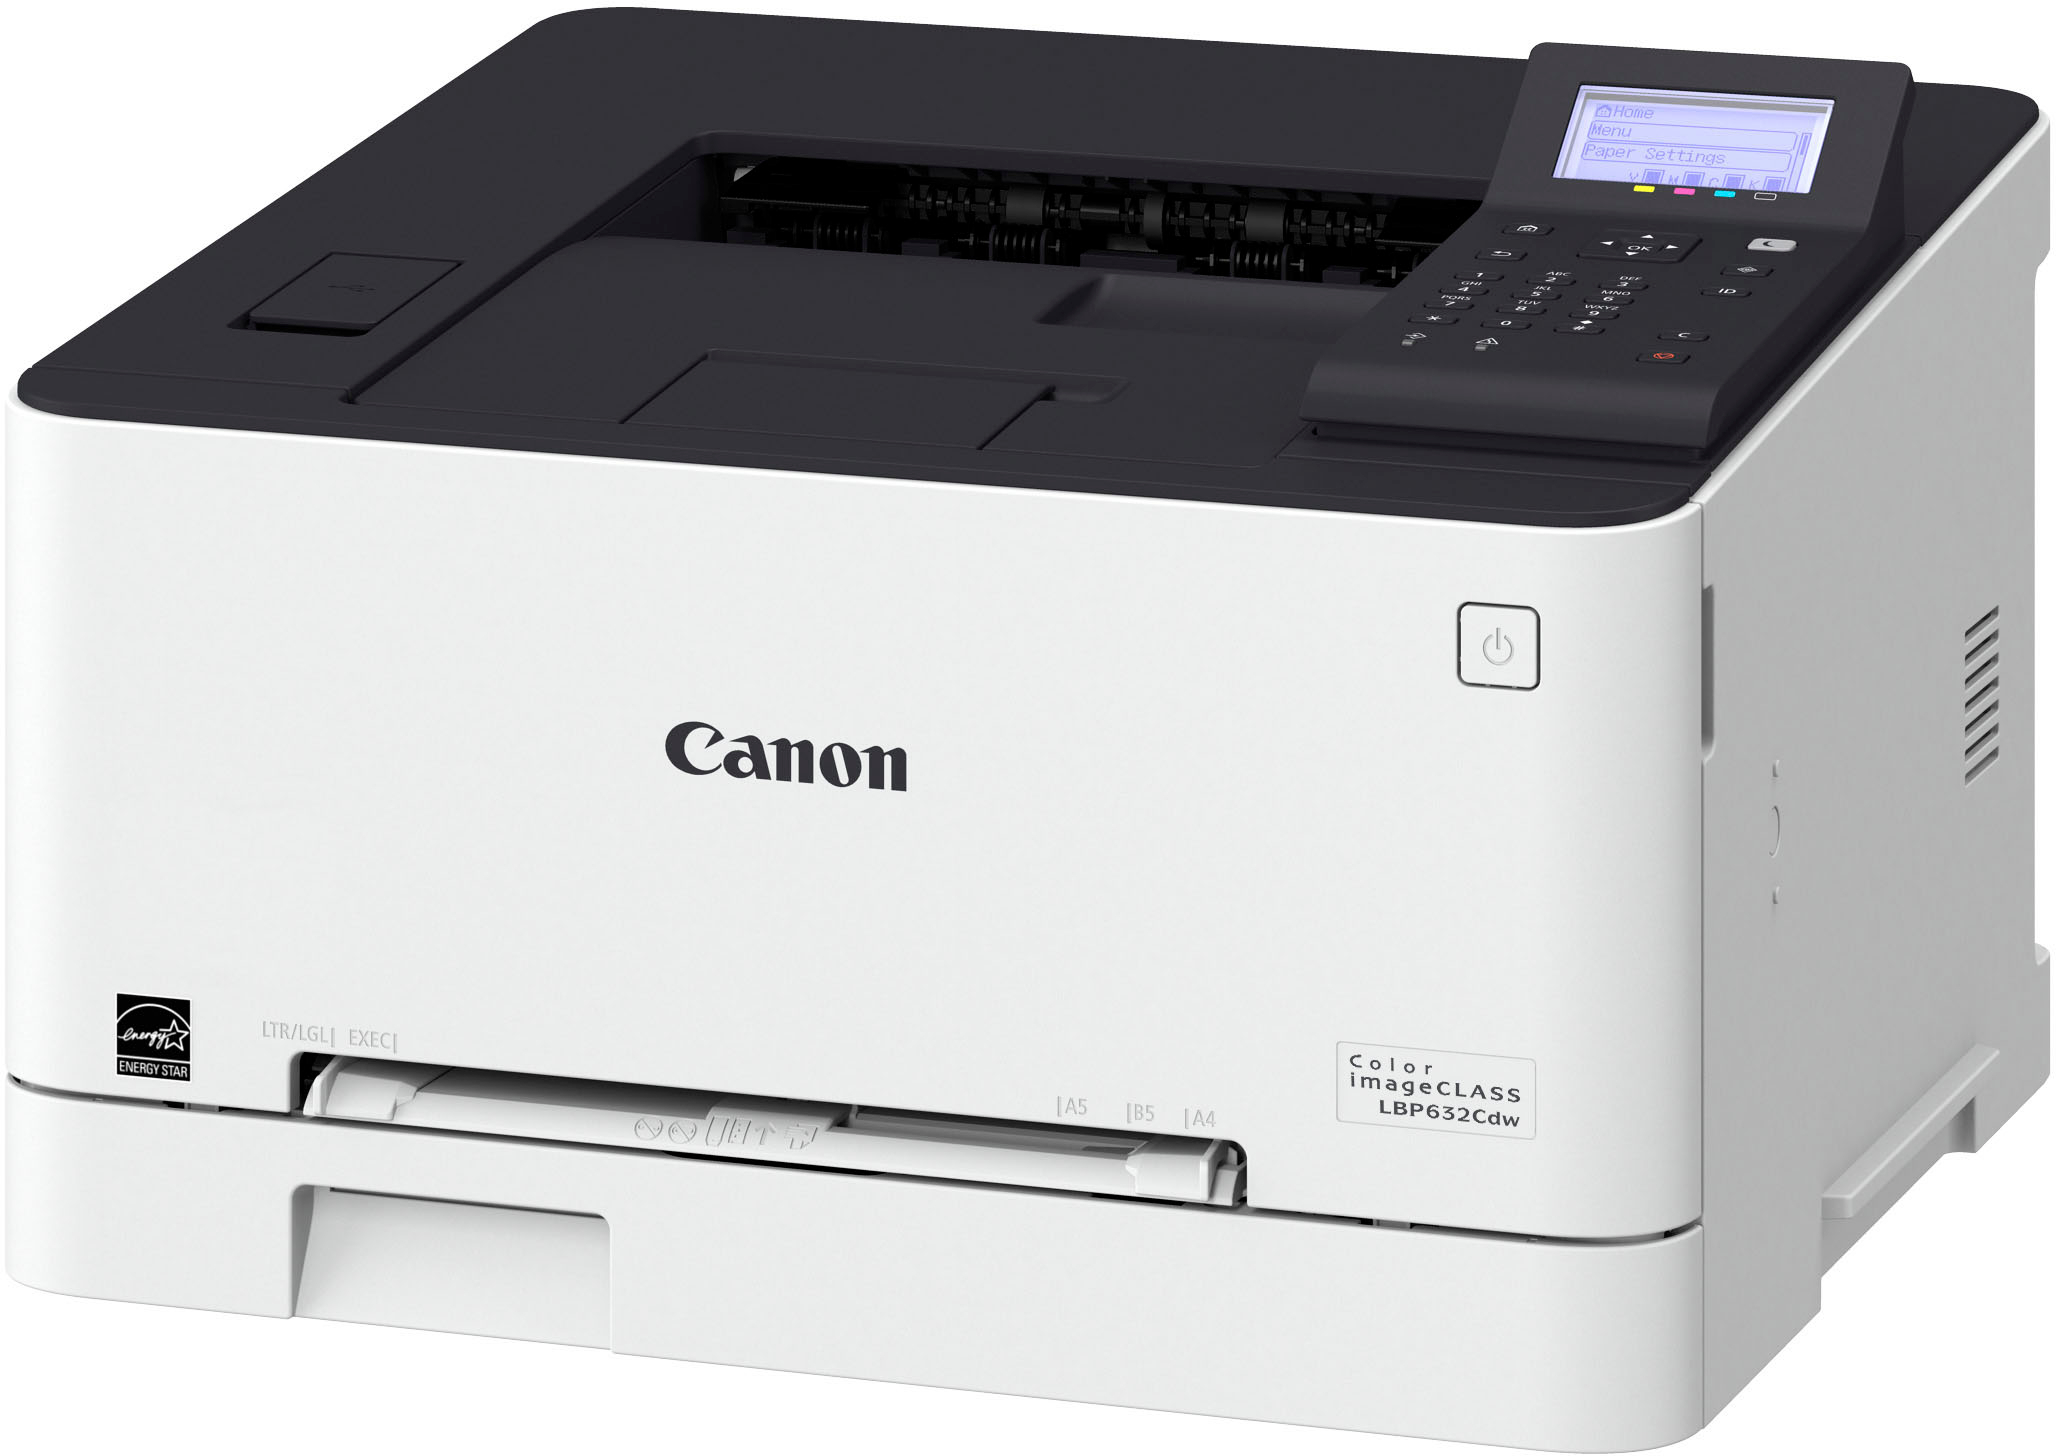 Angle View: Canon - PIXMA MG2525 All-In-One Inkjet Printer - Black